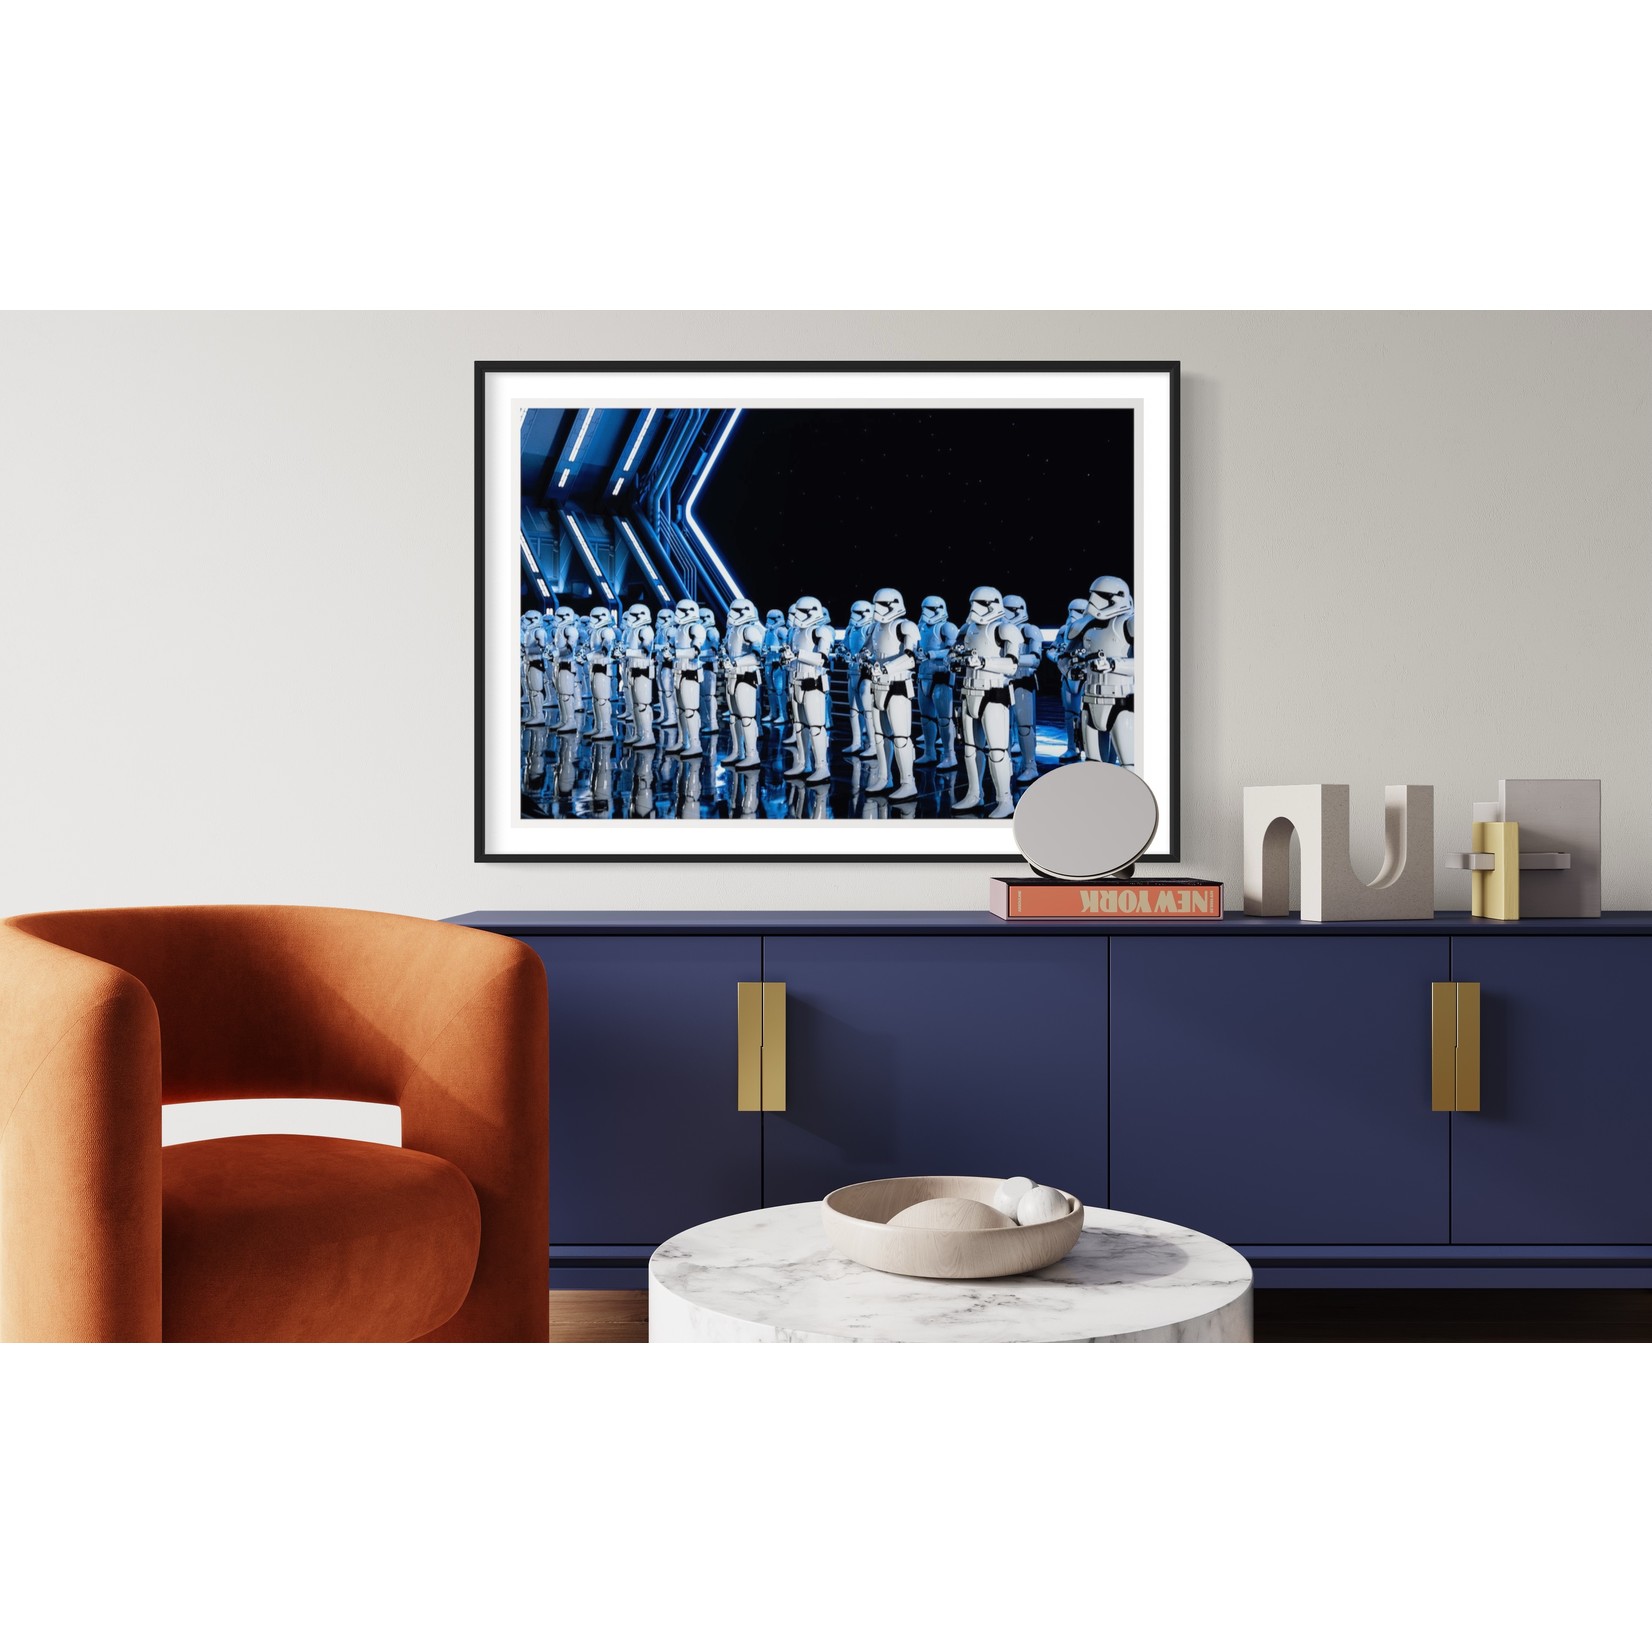 The Picturalist | Fine Art Print on Rag Paper Tk Troopers by B. McGowan